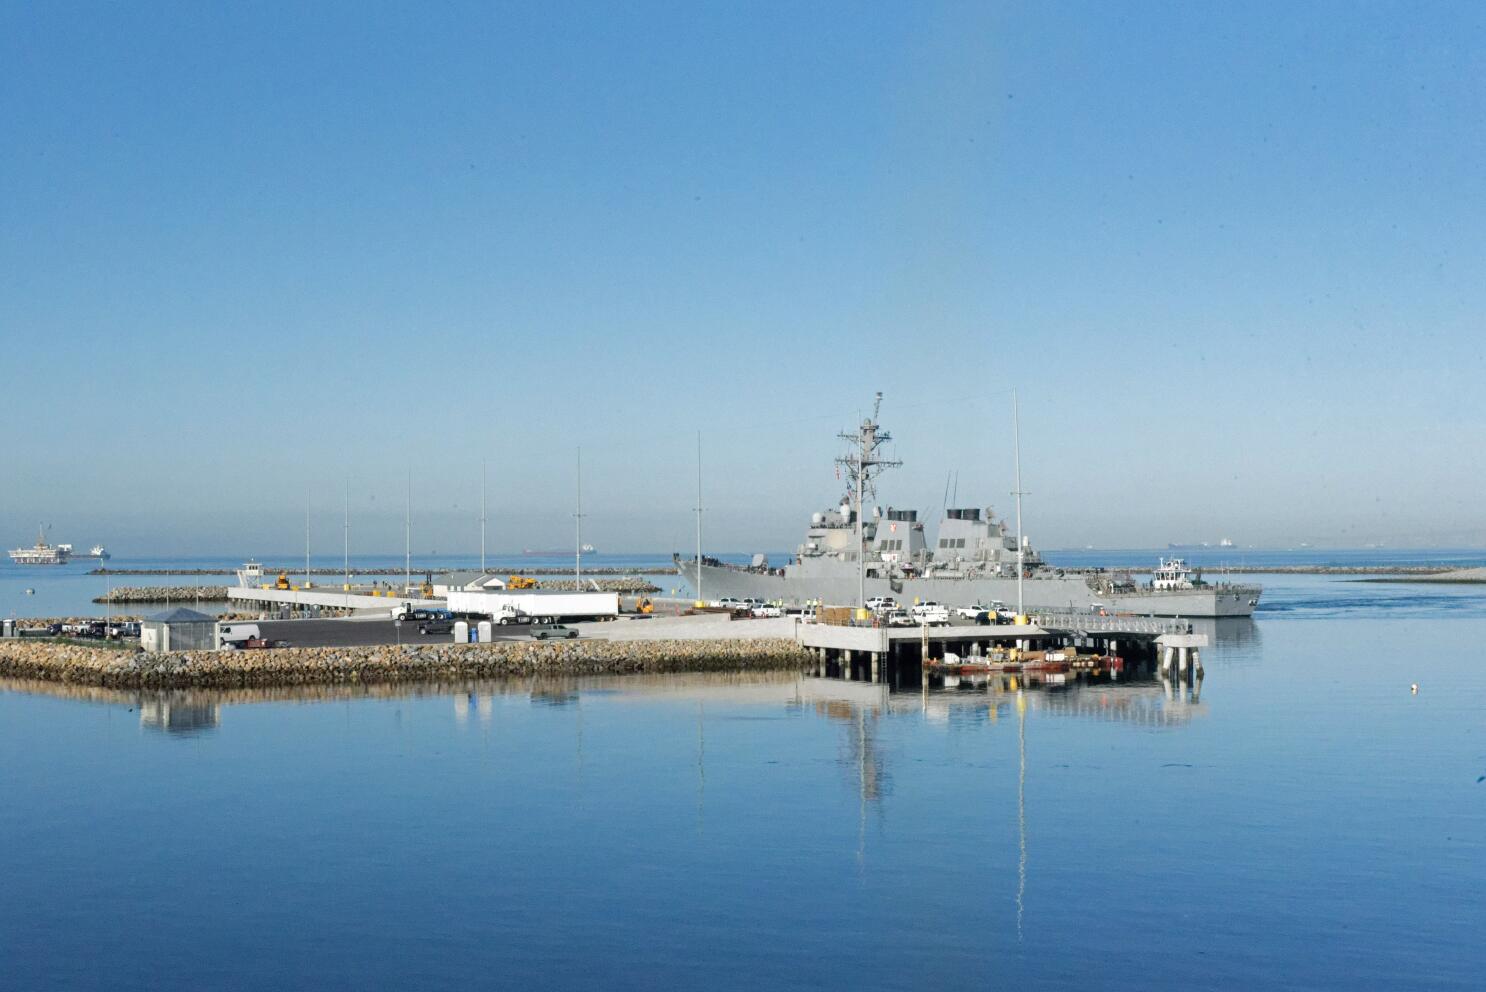 With new ammunition pier, Seal Beach can help get warships to